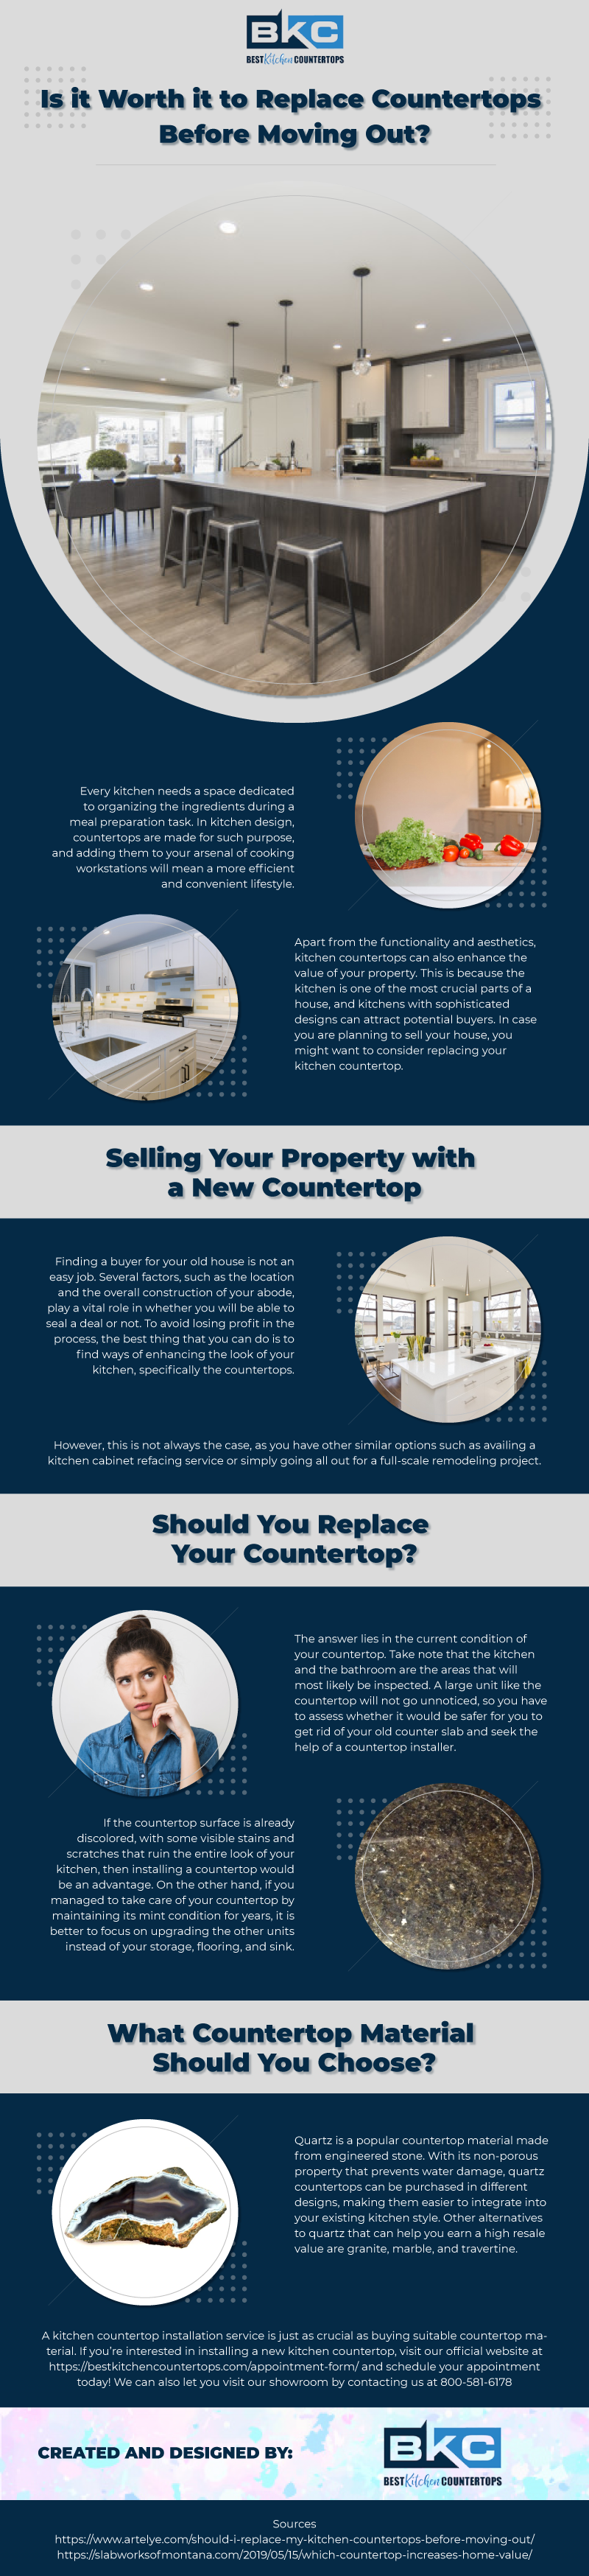 Is_it_Worth_it_to_Replace_Countertops_Before_Moving_Out_infographic_image